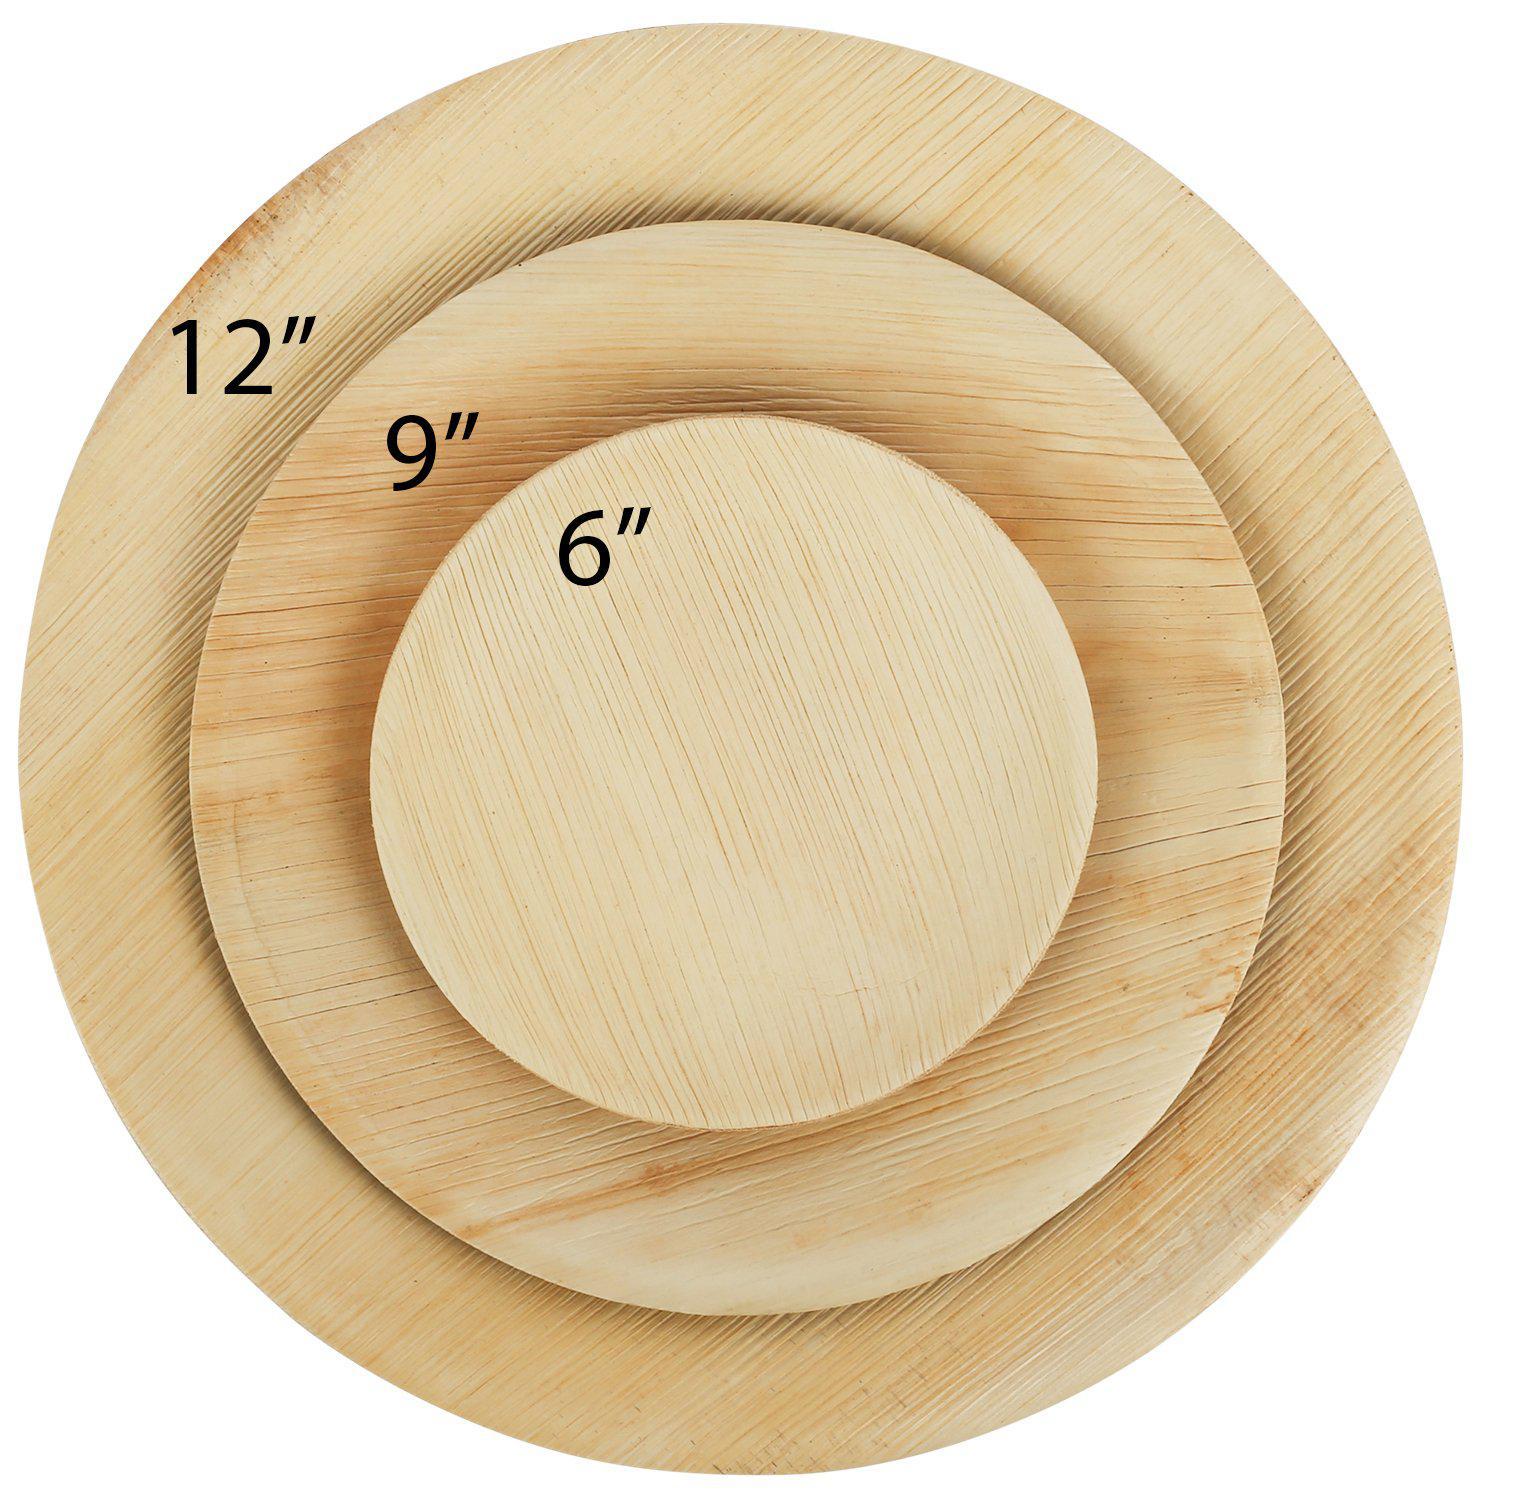 12" Round Entrée Plates - Pack of 25